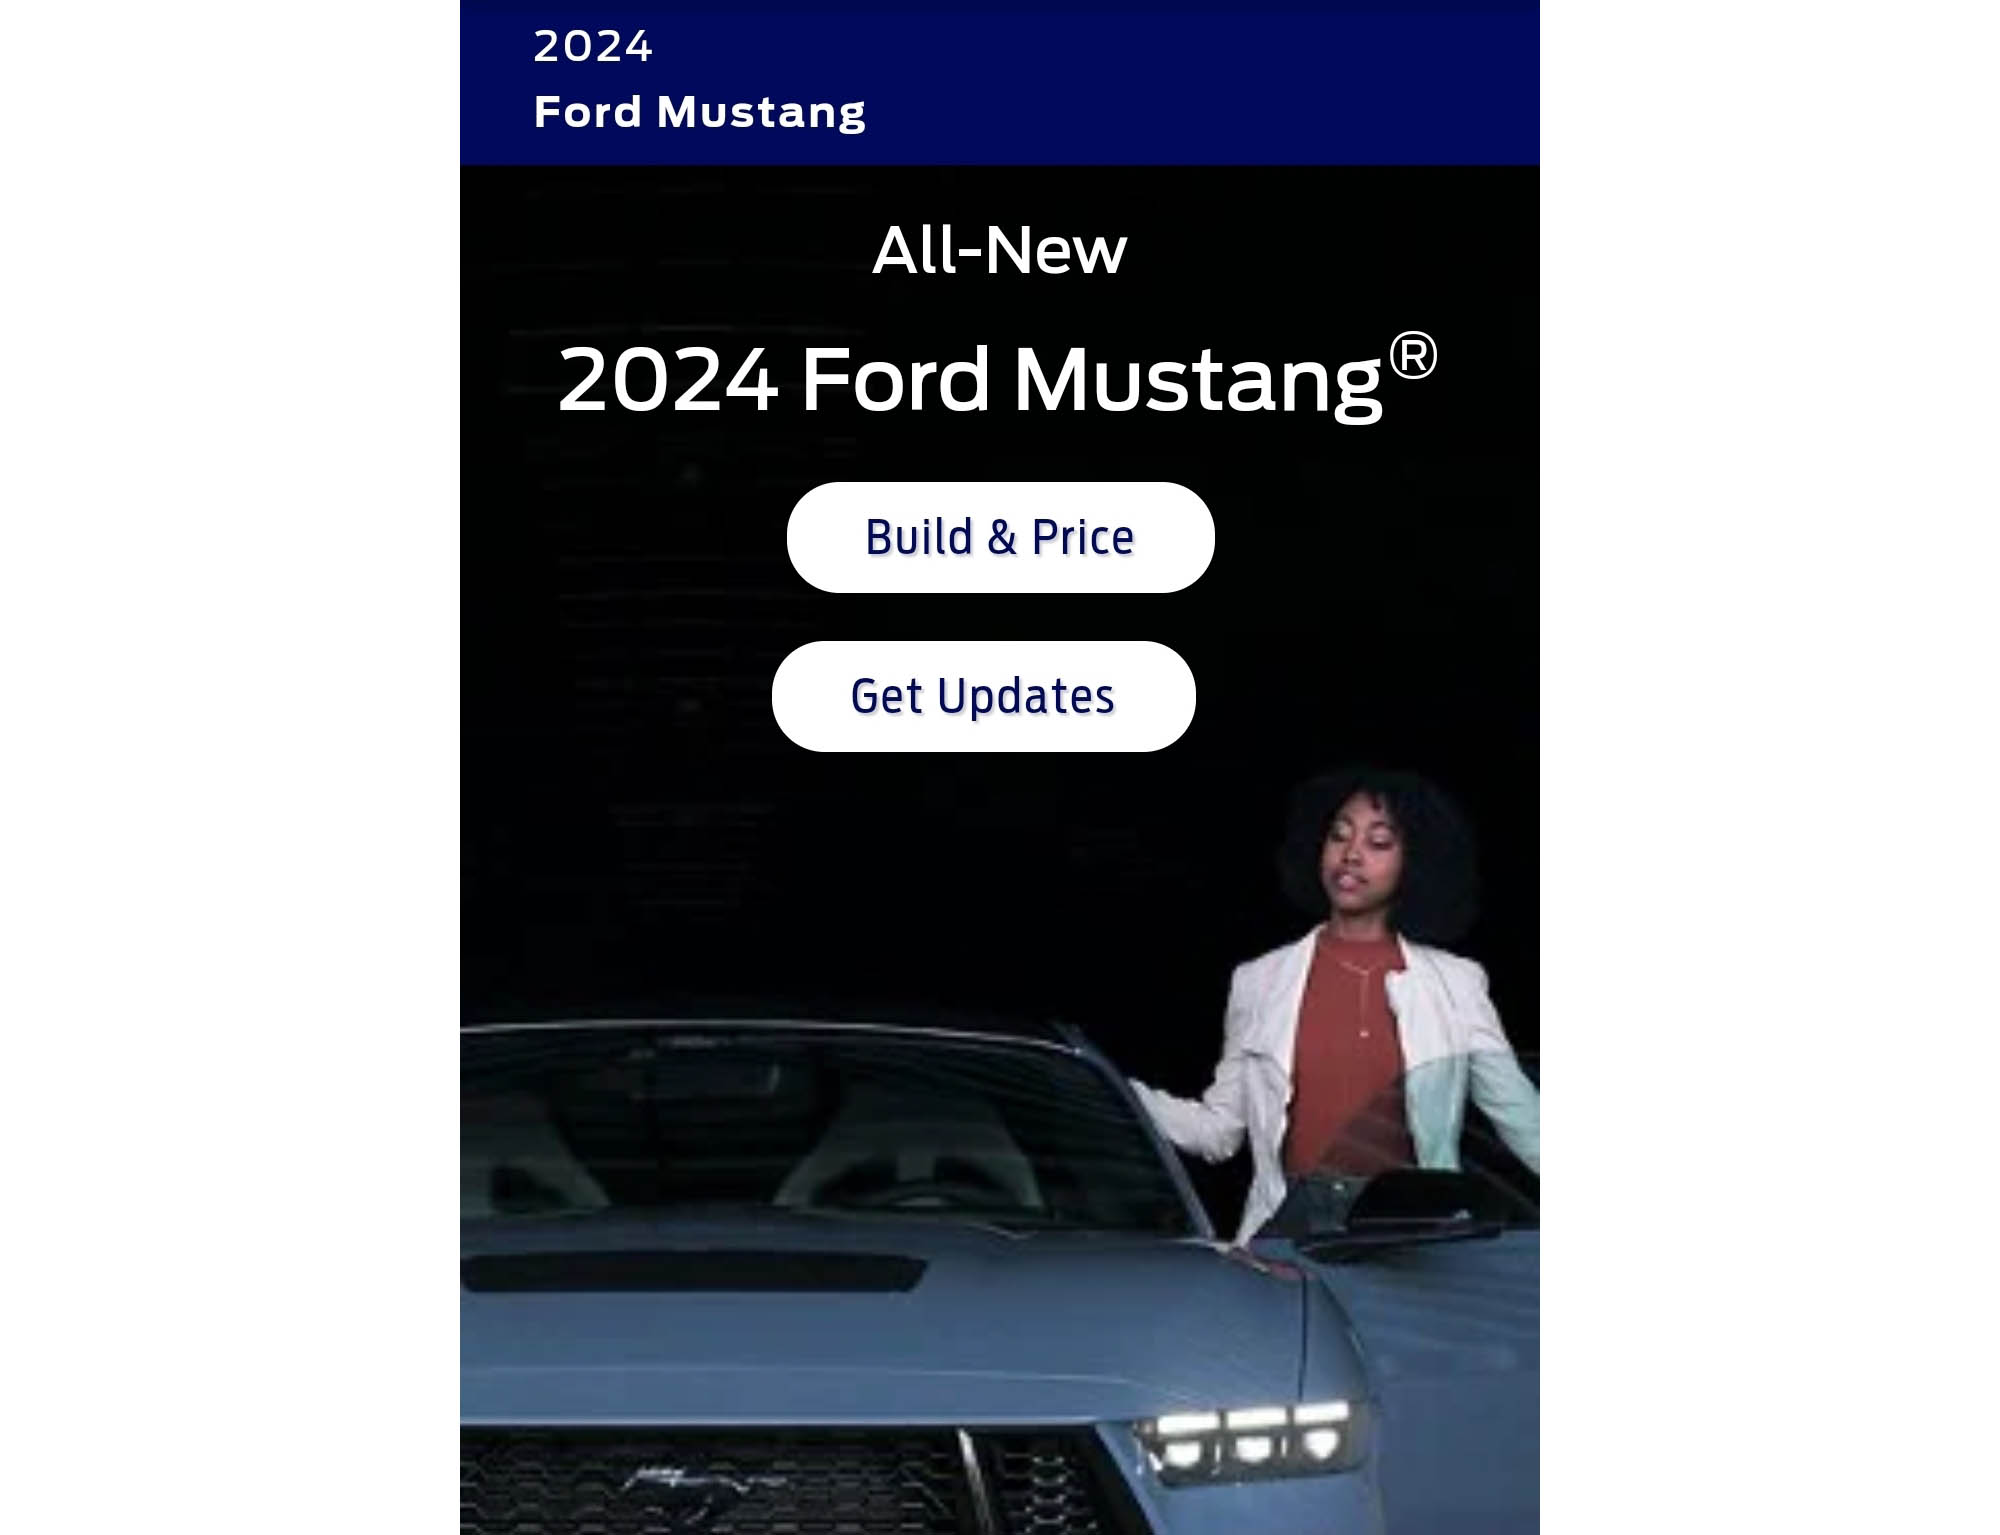 Official Build & Price for 2024 Mustang just appeared on